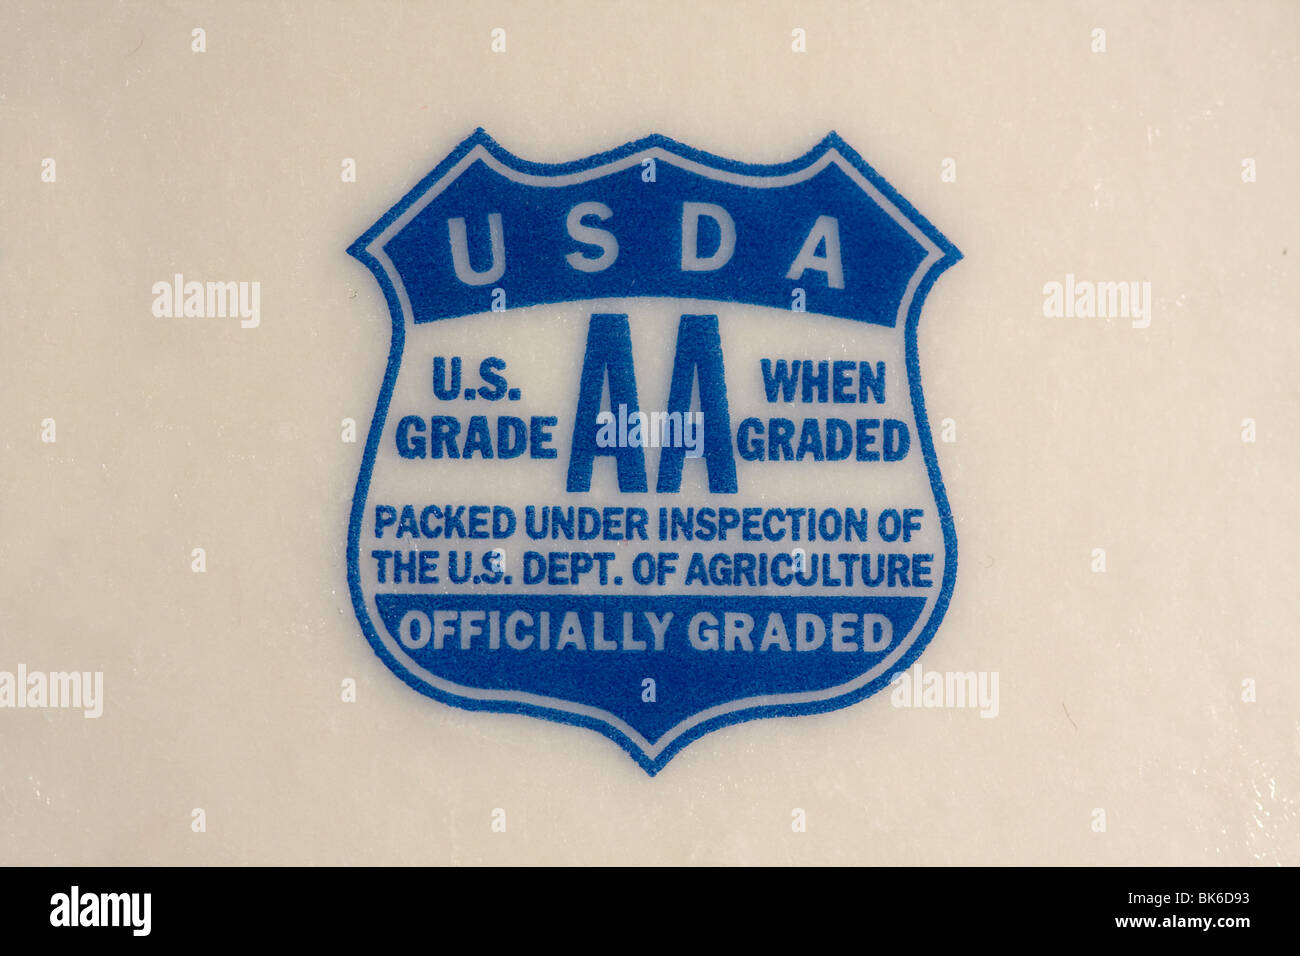 Inspection Stamp 'USDA U.S. GRADE AA WHEN GRADED PACKED UNDER INSPECTION OF THE U.S. DEPT. OF AGRICULTURE OFFICIALLY GRADED' Stock Photo